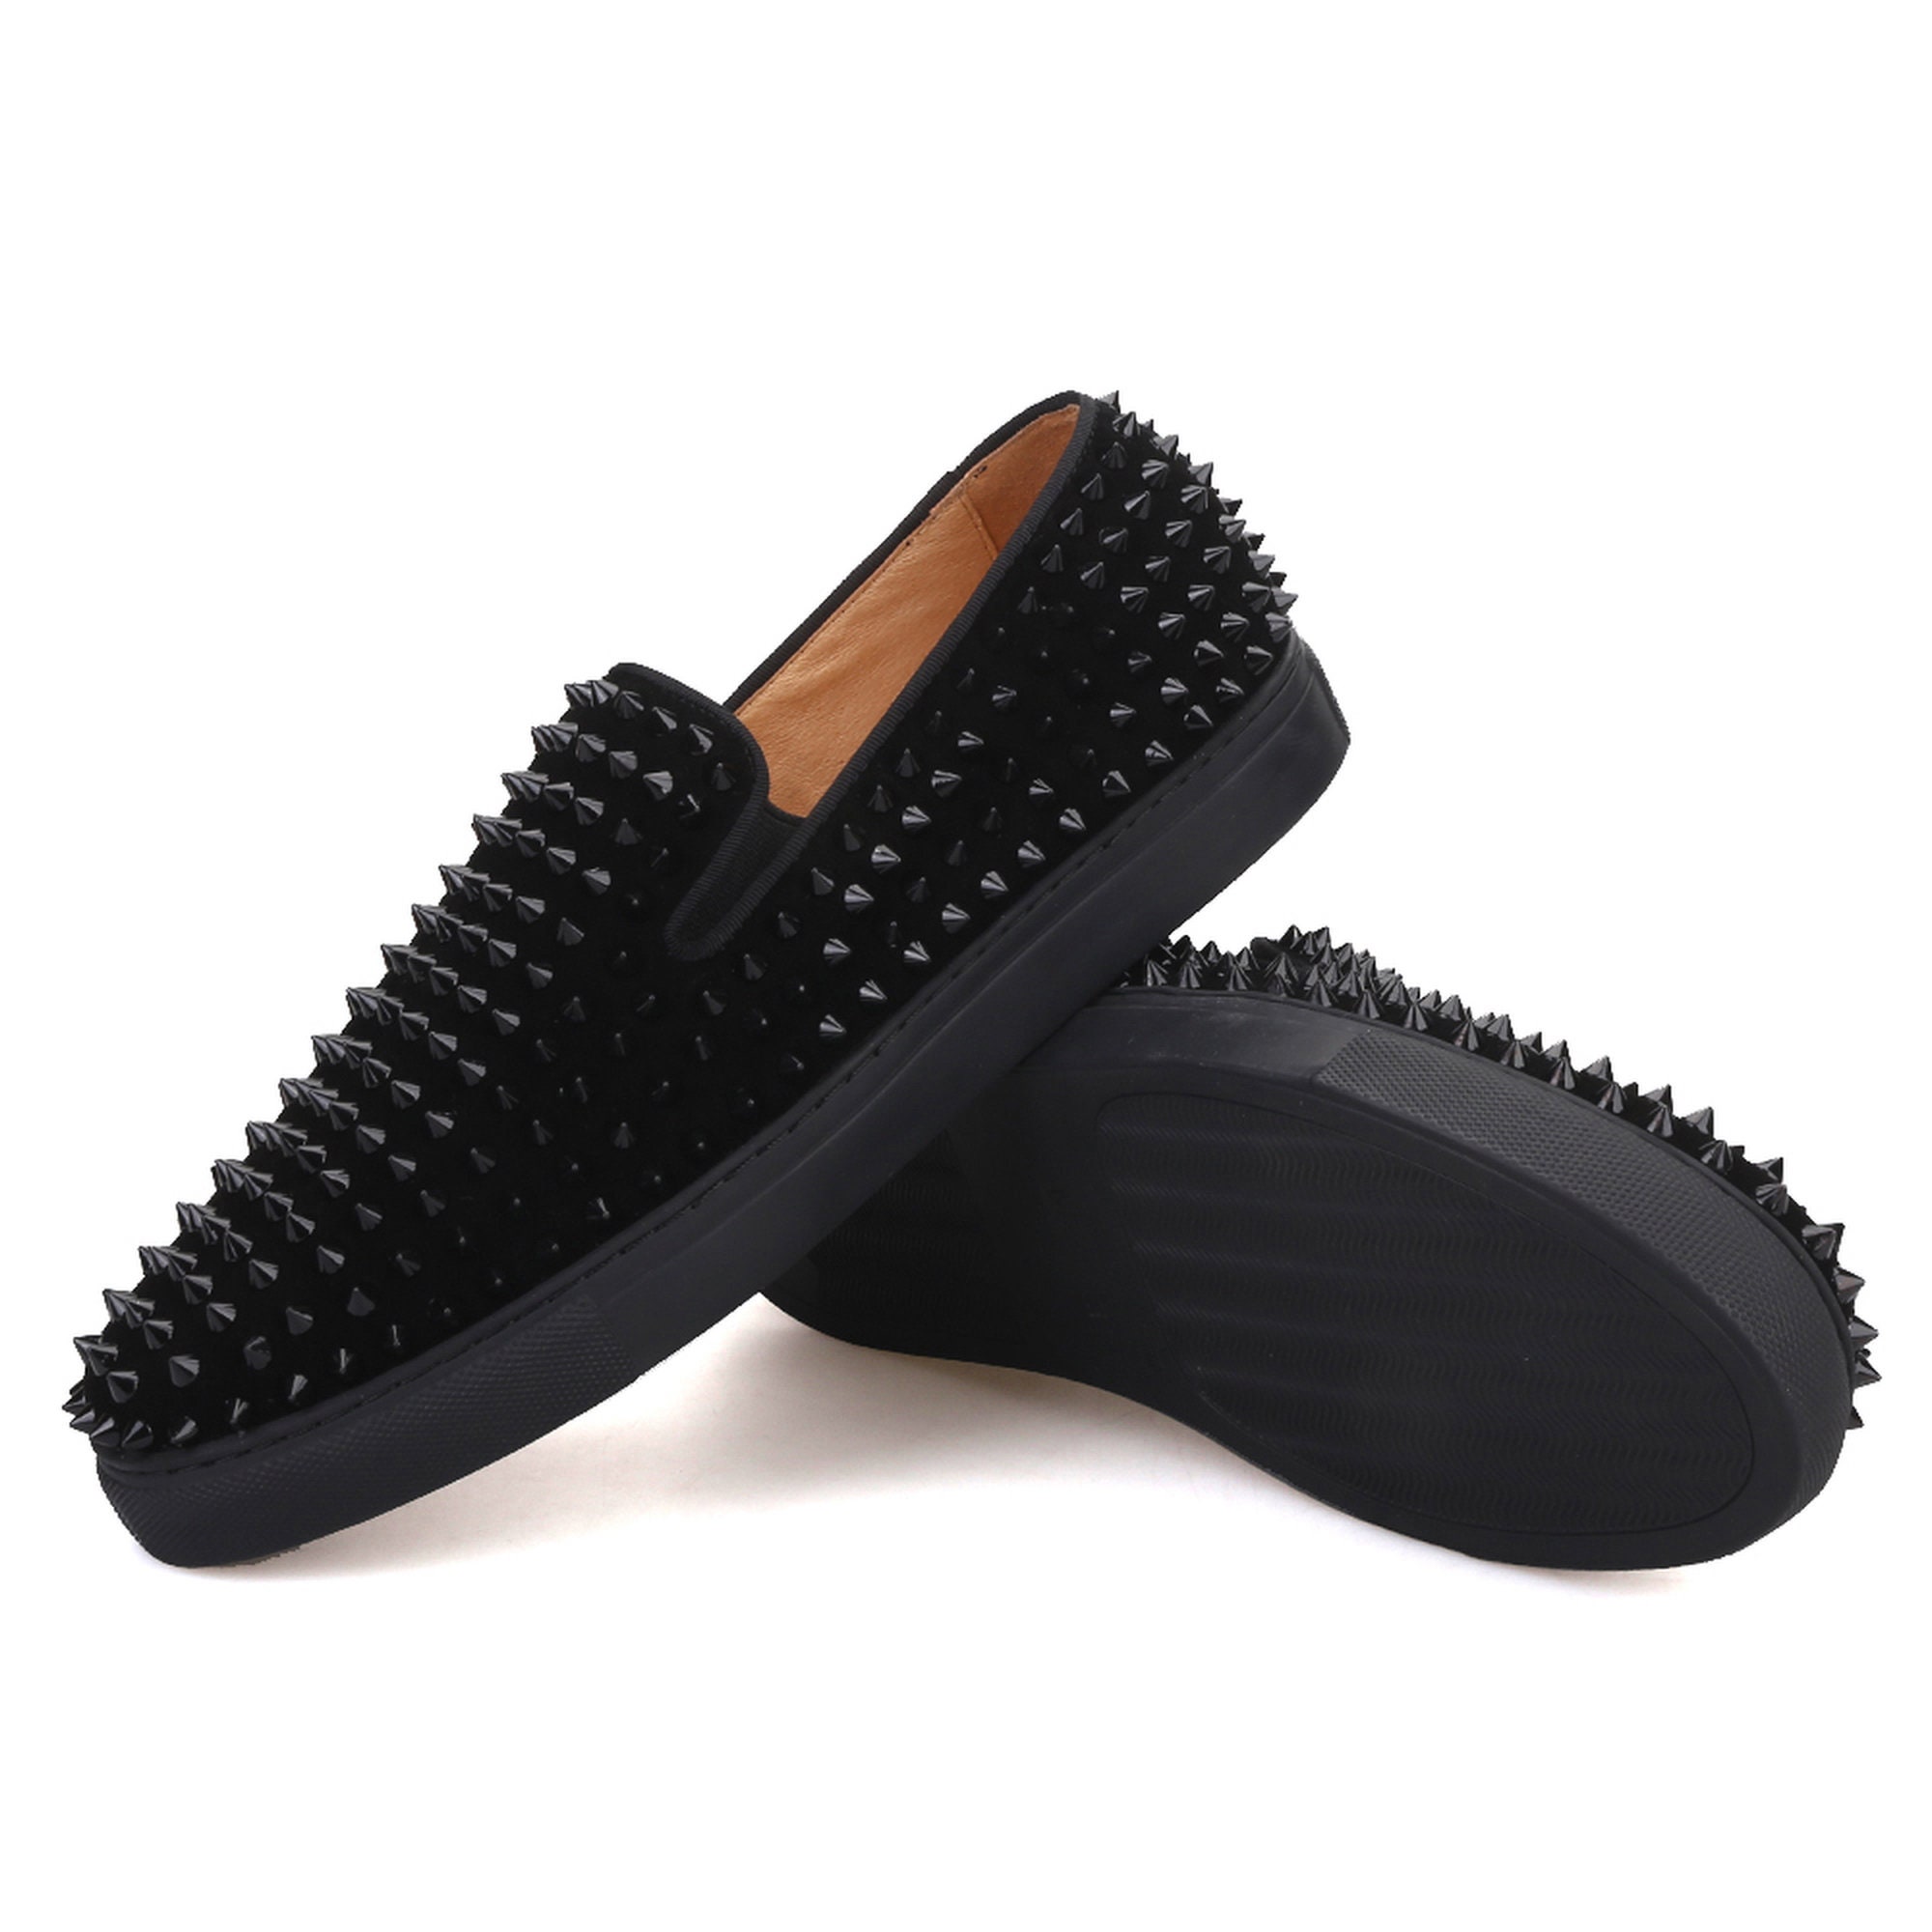 Roller-Boat - Sneakers - Veau velours and spikes - Black